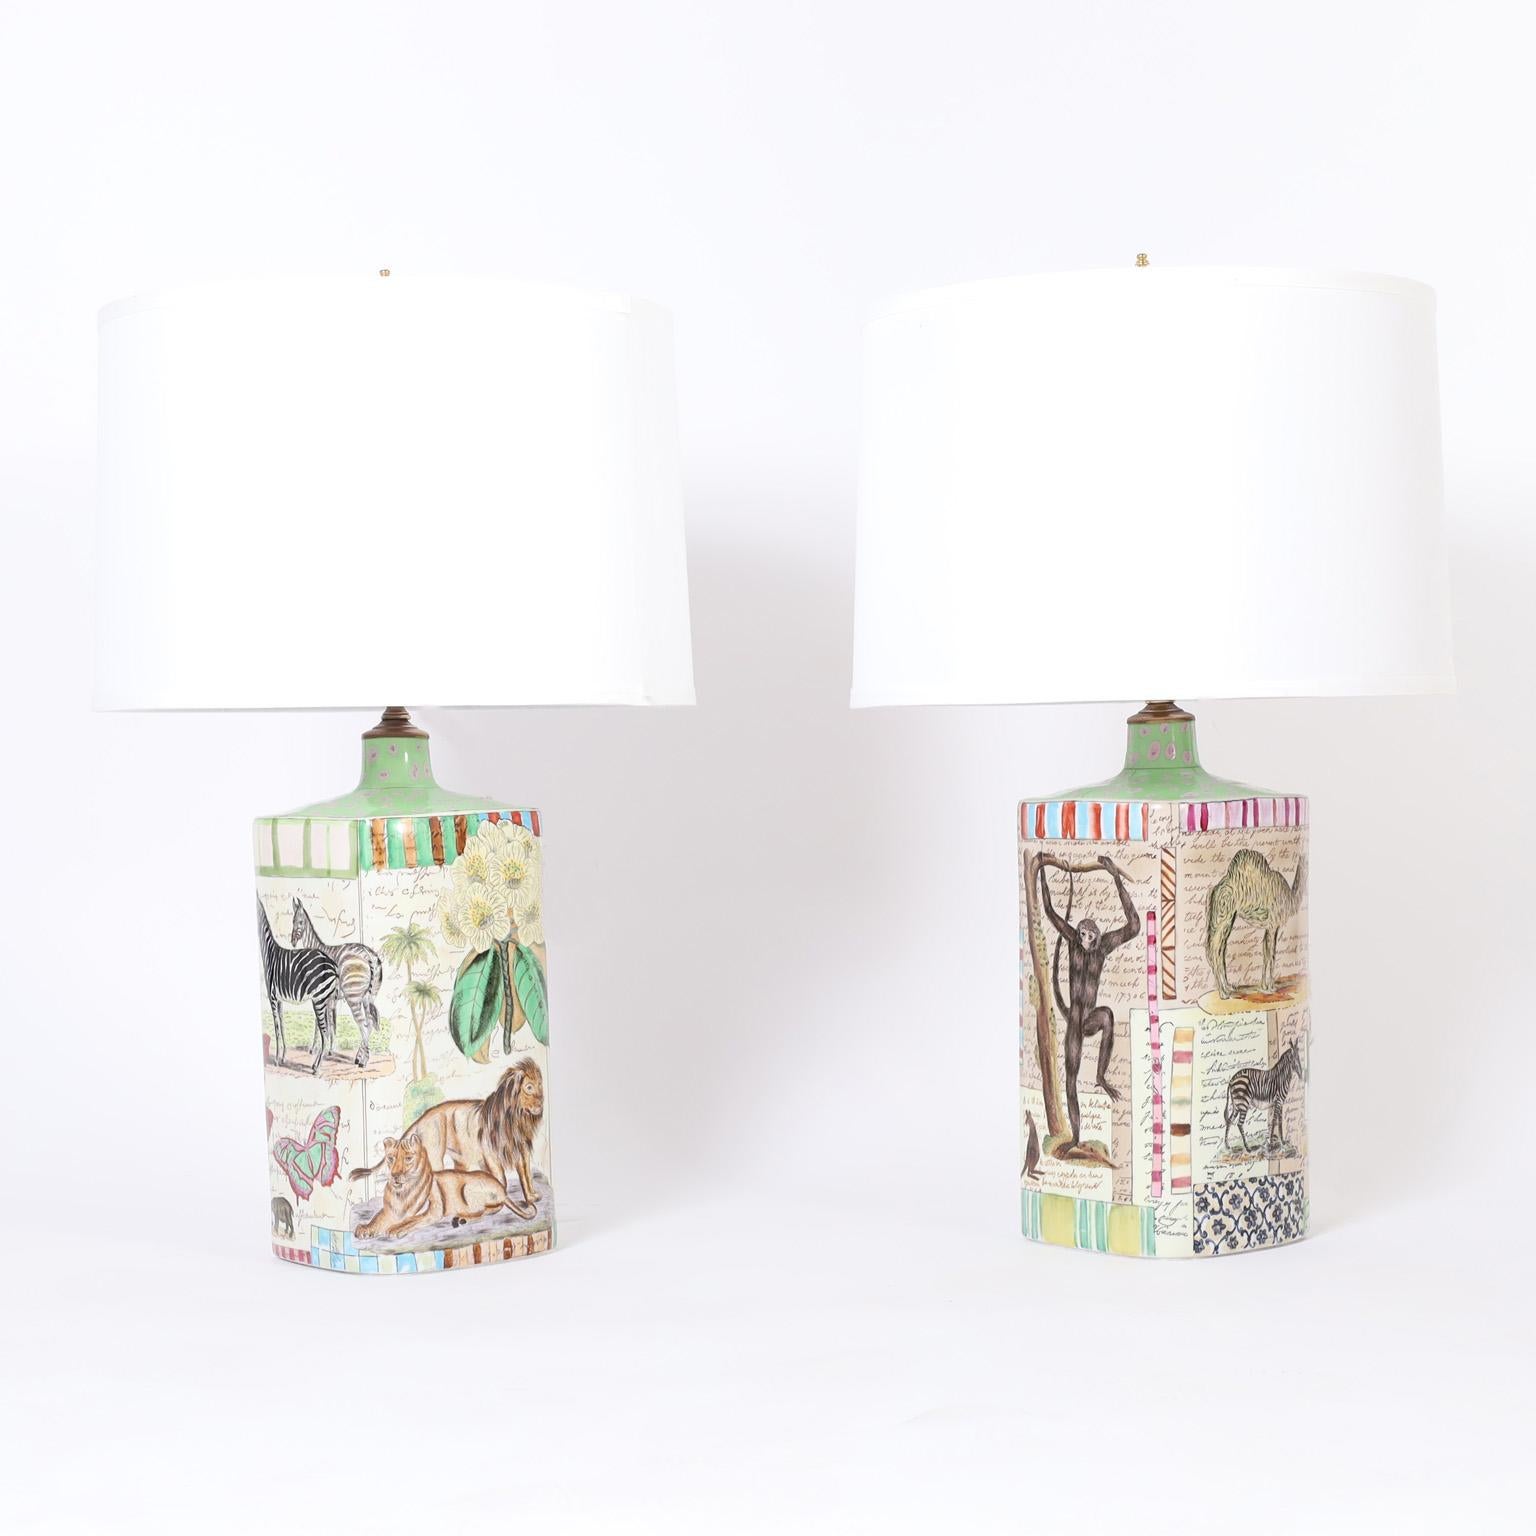 Transporting pair of ceramic table lamps decorated all around with animals on a faux scholastic background. Marked John Derian for Tozai on the bottom.